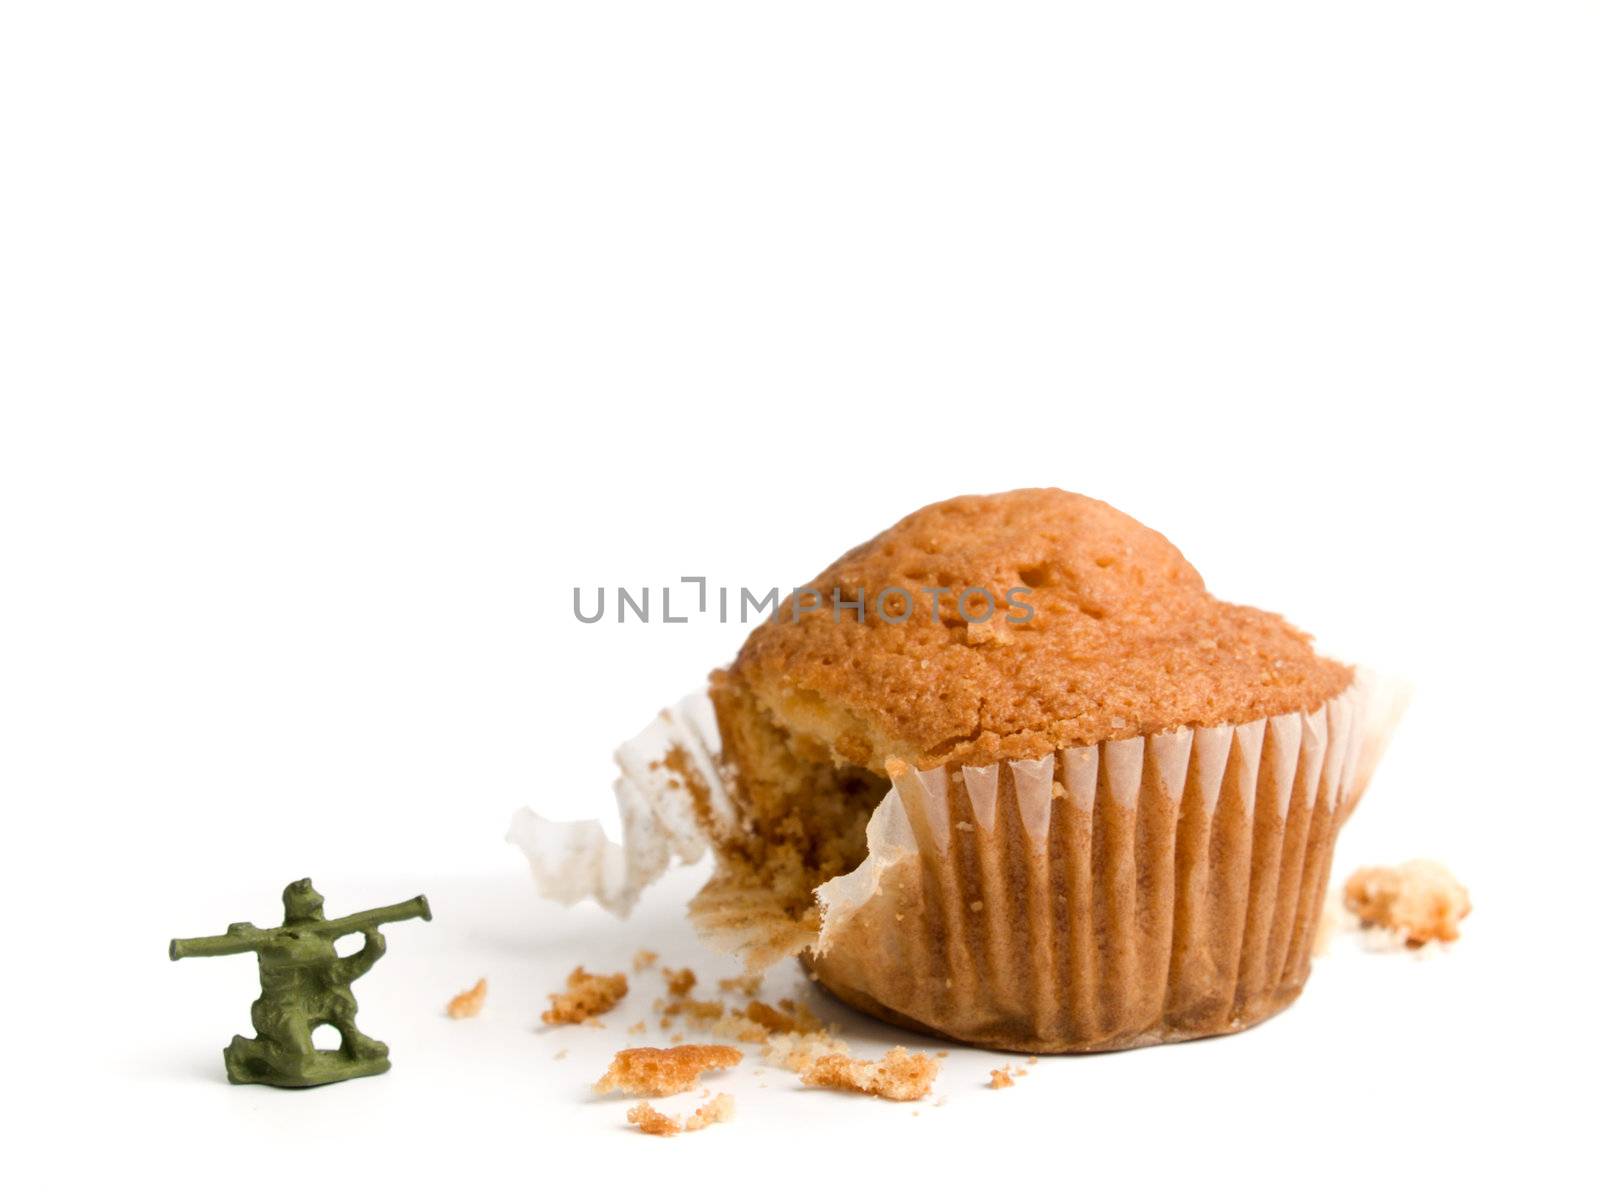 A toy soldier shooting his bazooka at a muffin. A conceptual image about the importance of a healthy lifestyle.